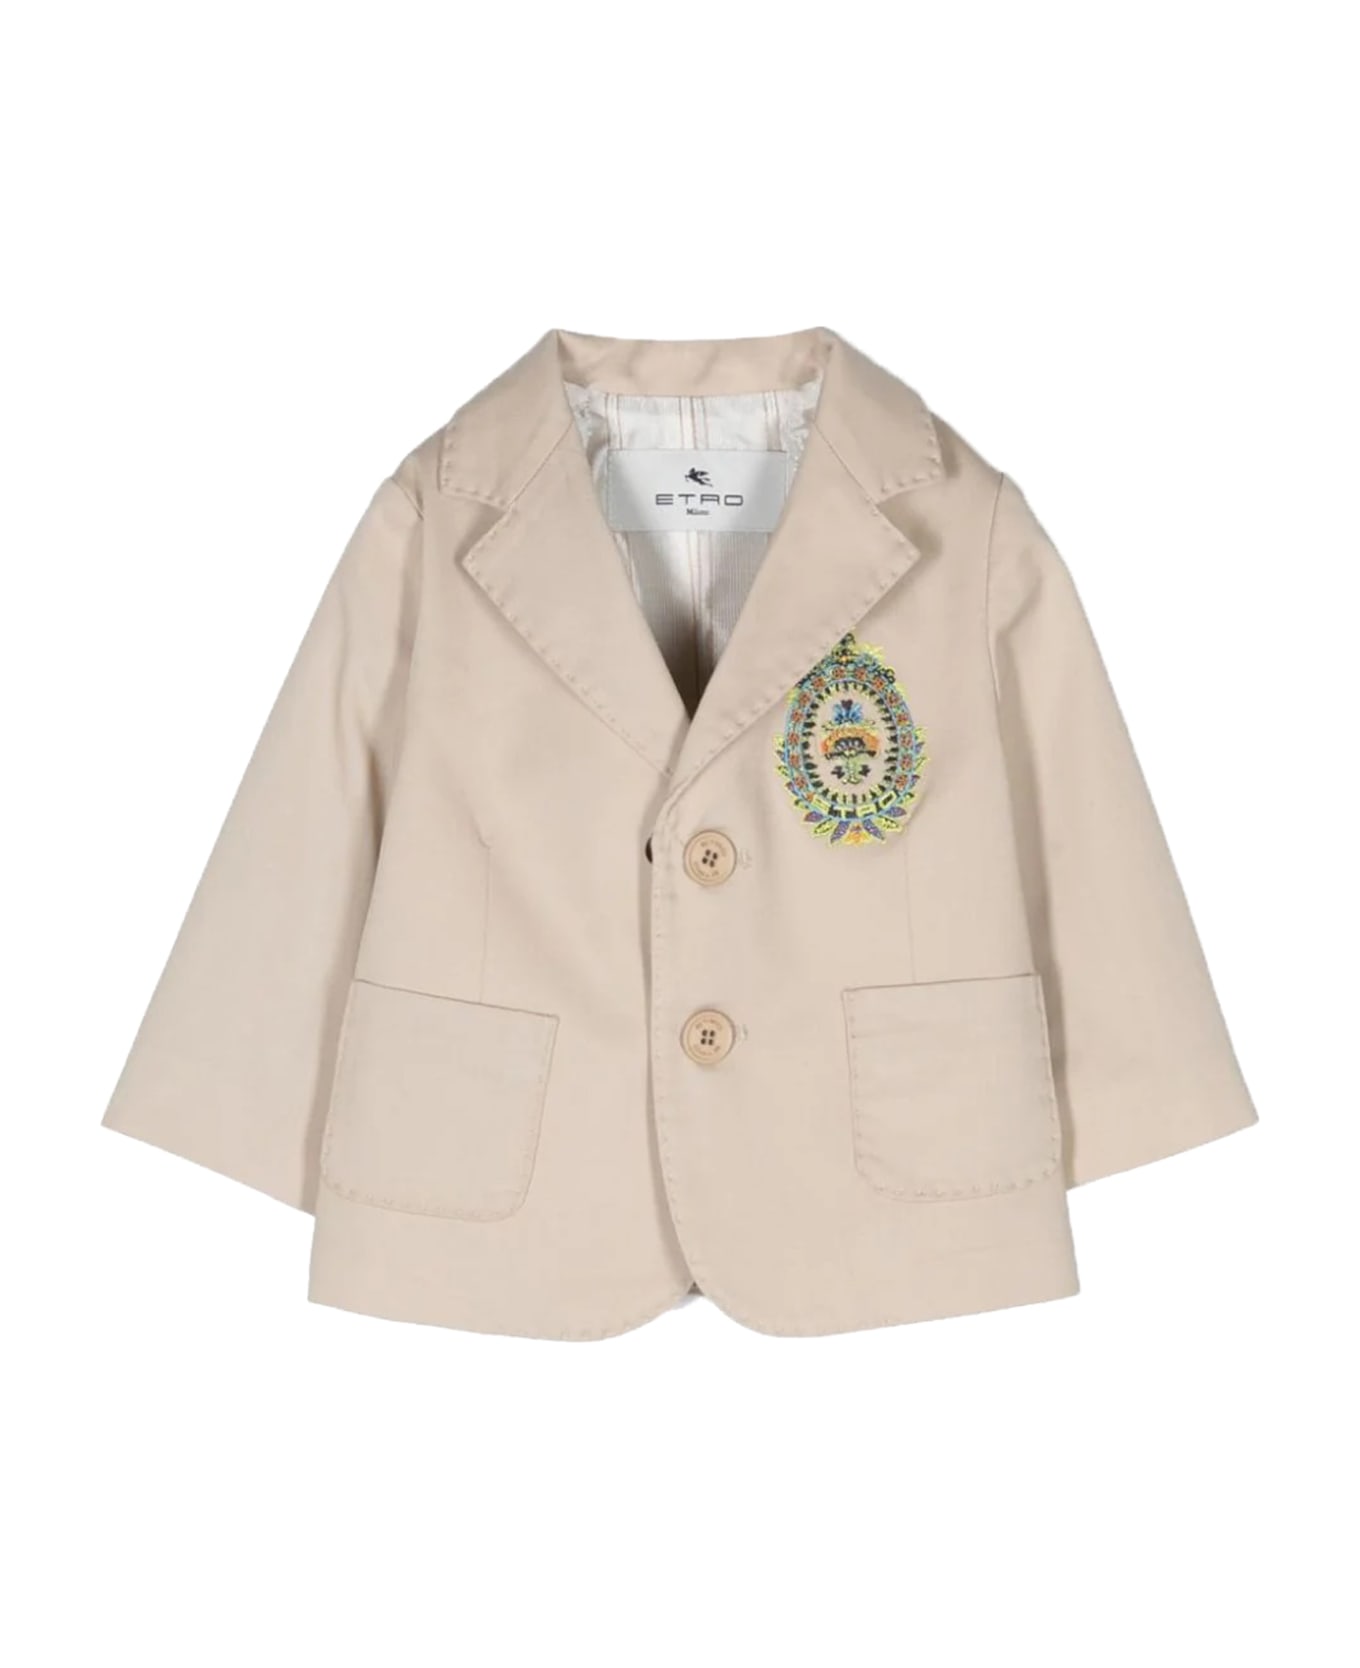 Etro Jacket With Embroidered Heraldic Coat Of Arms - Beige コート＆ジャケット